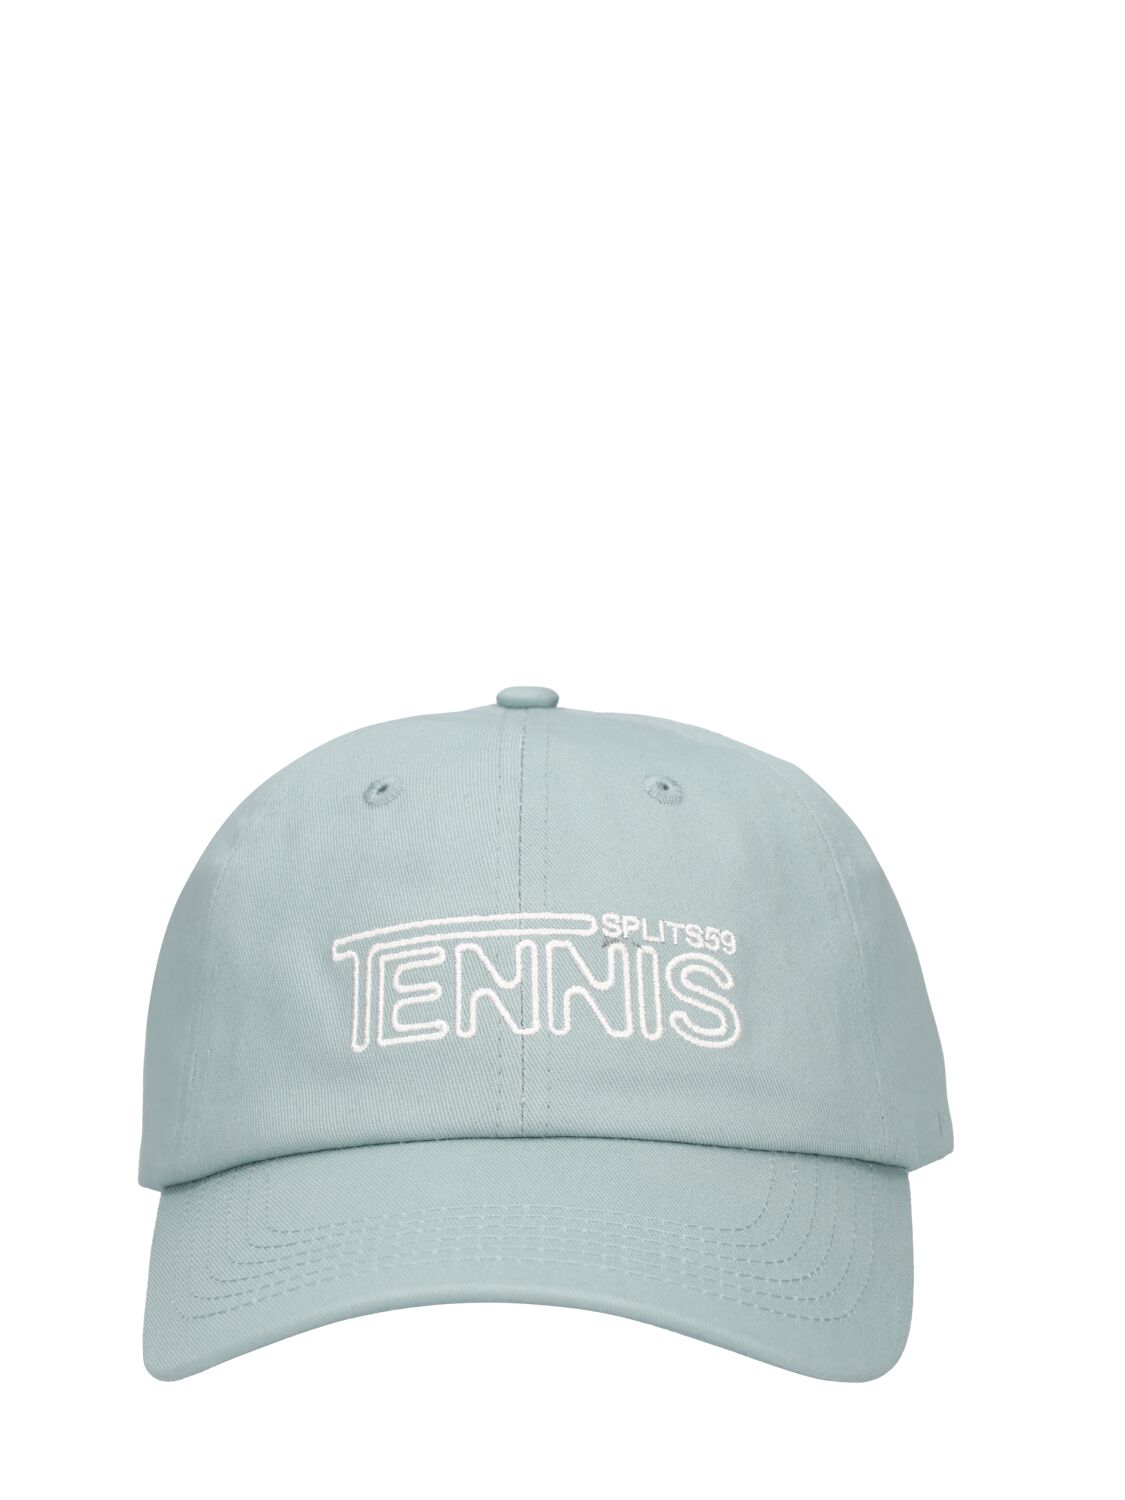 Image of Embroidered Tech Baseball Cap